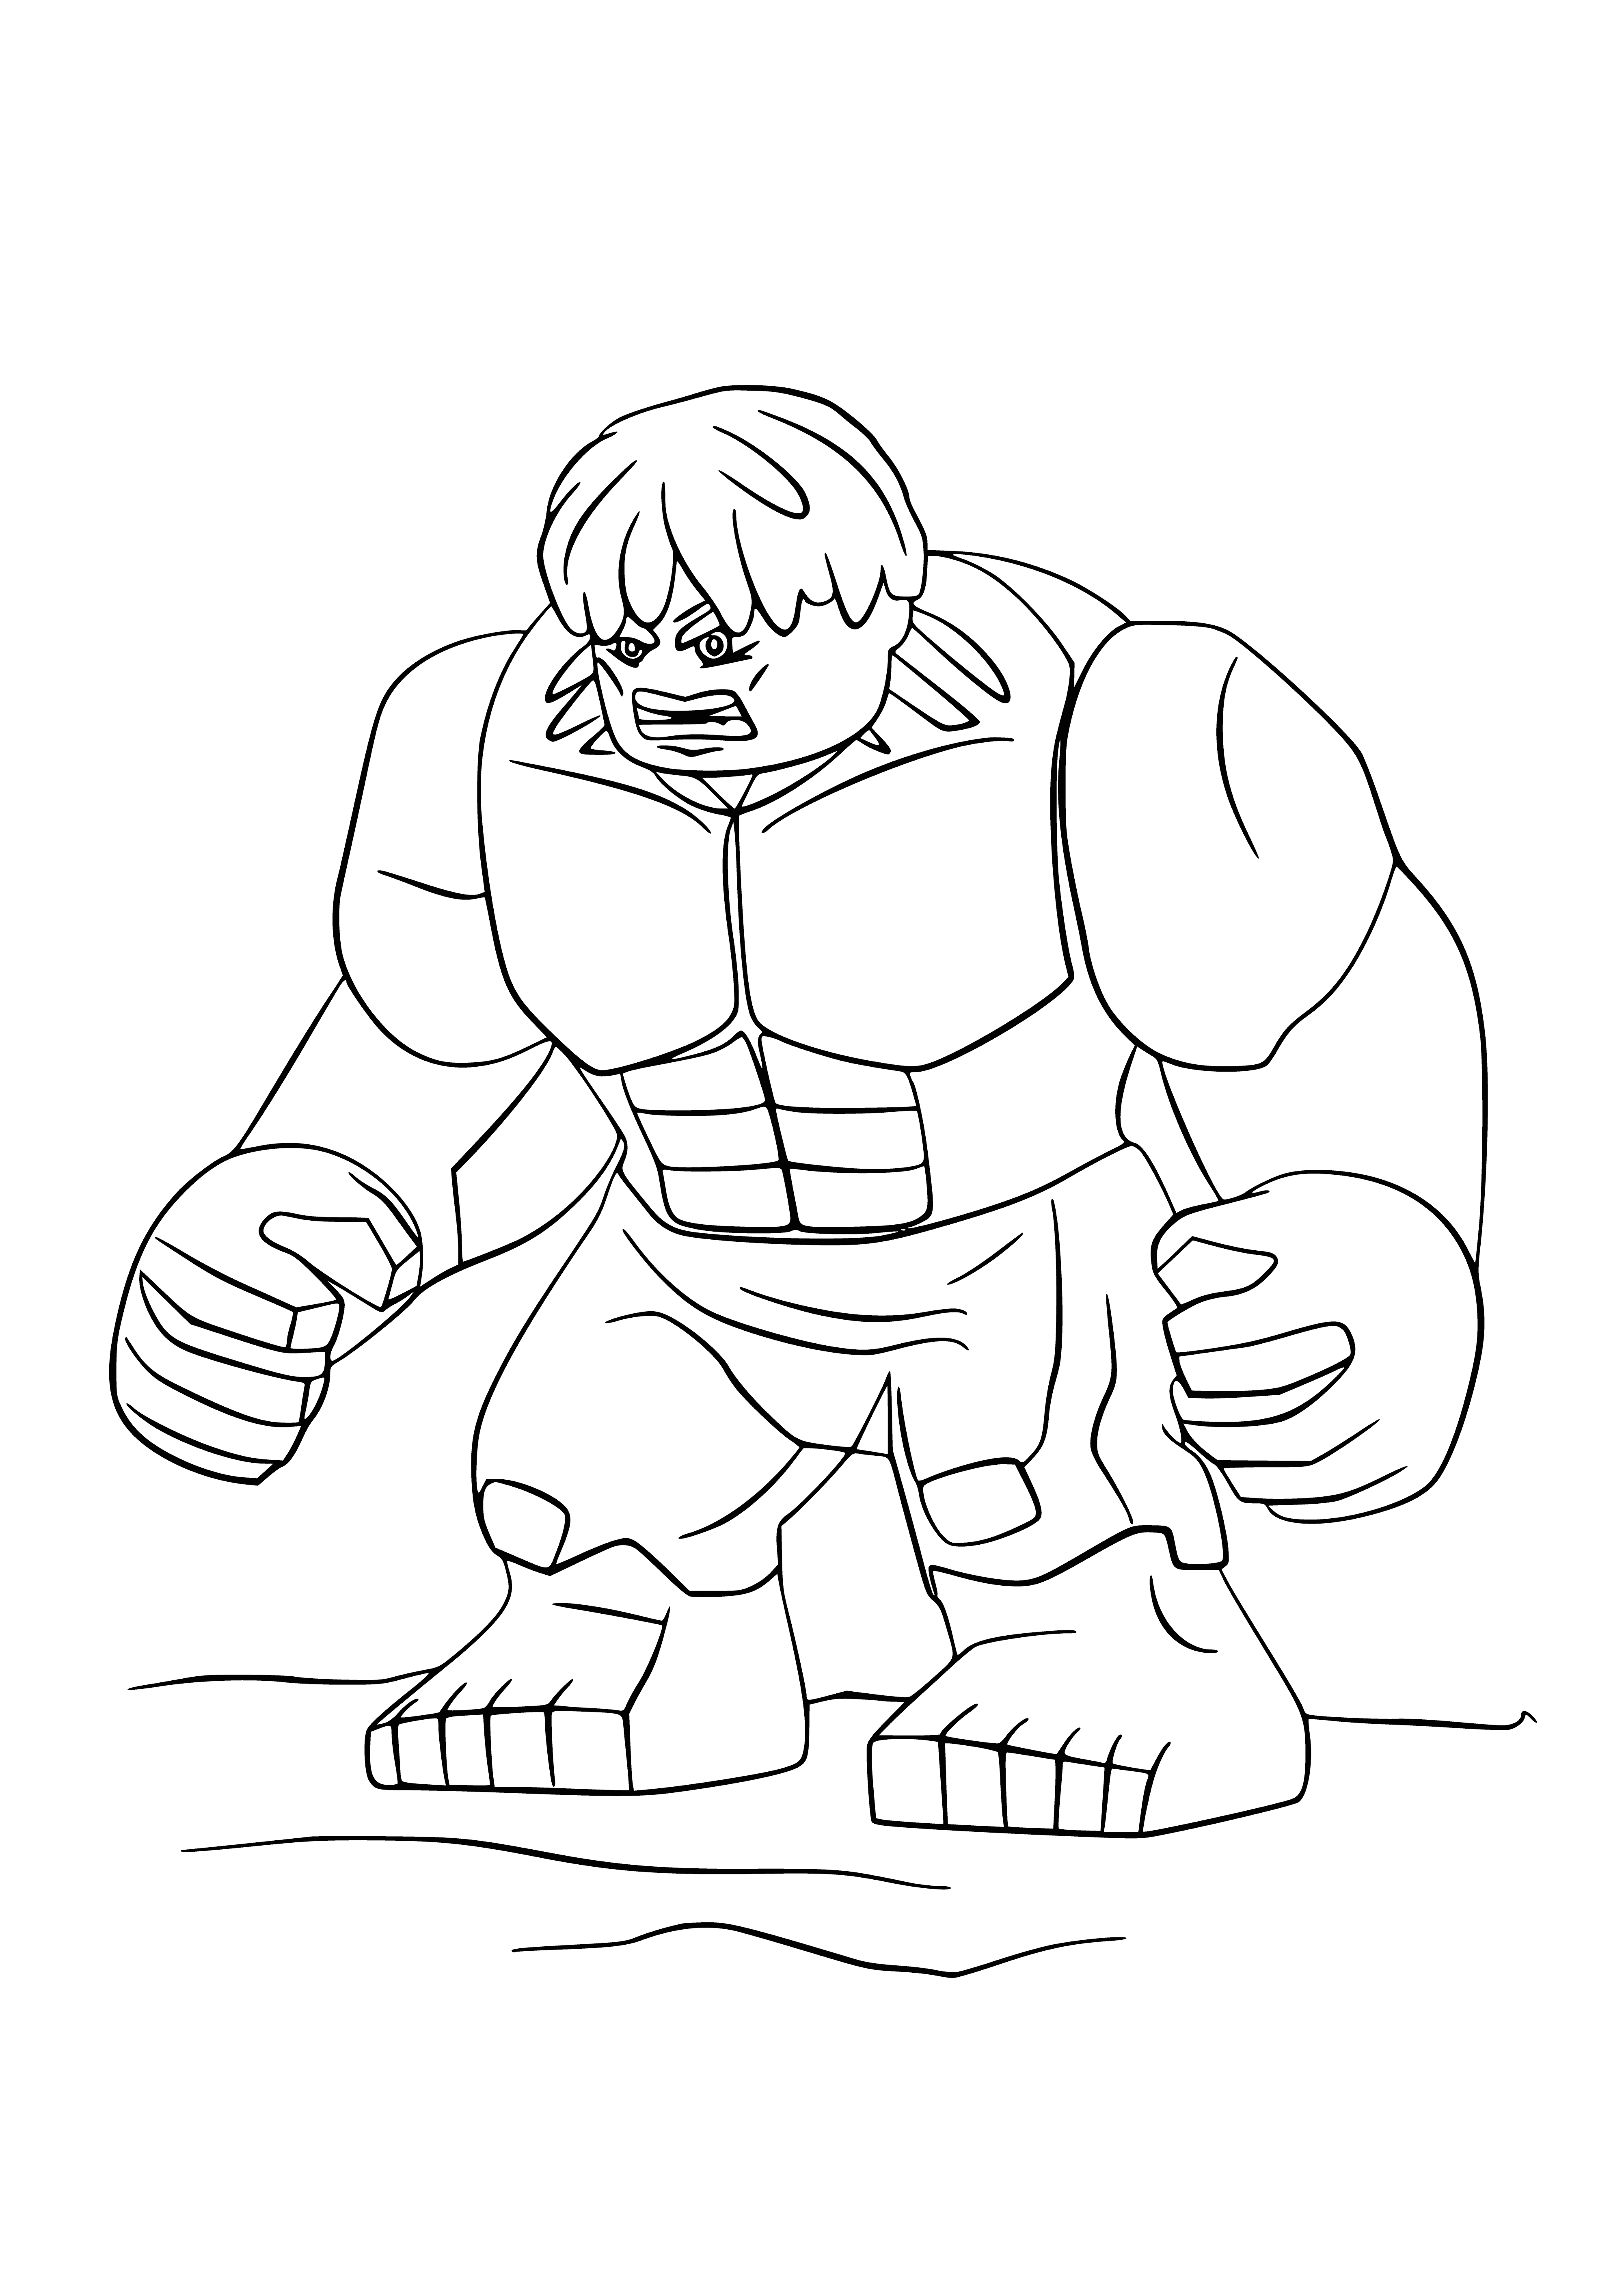 coloring page: Hulk stands strong, green & muscular with purple shorts, black belt & black hair, ready for action with his angry look. #Avengers